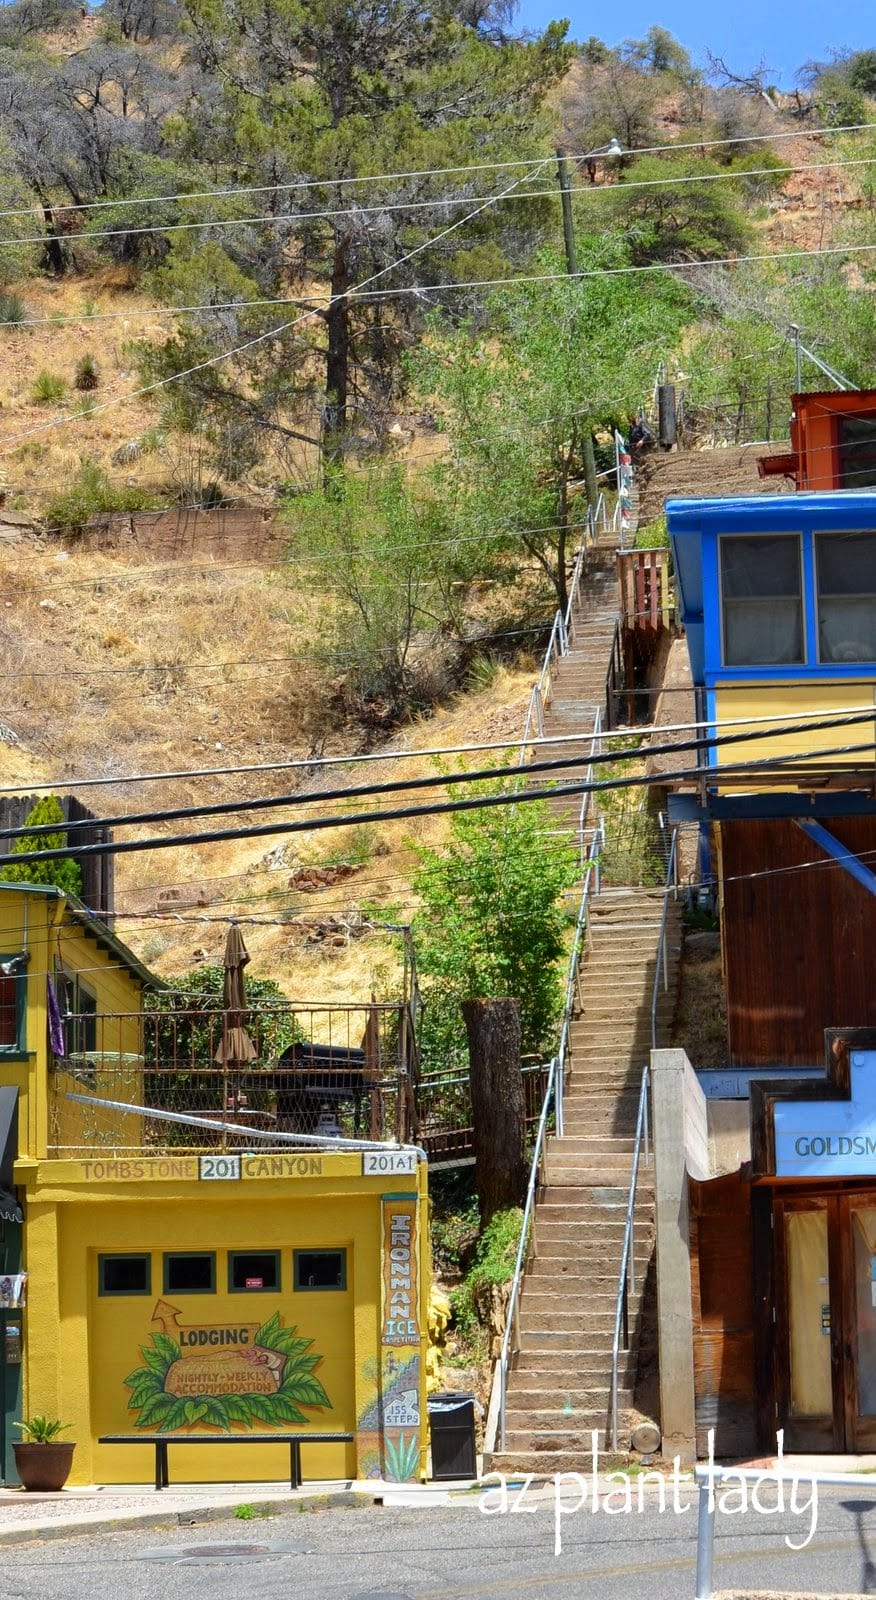 The Bisbee Great Stair Climb